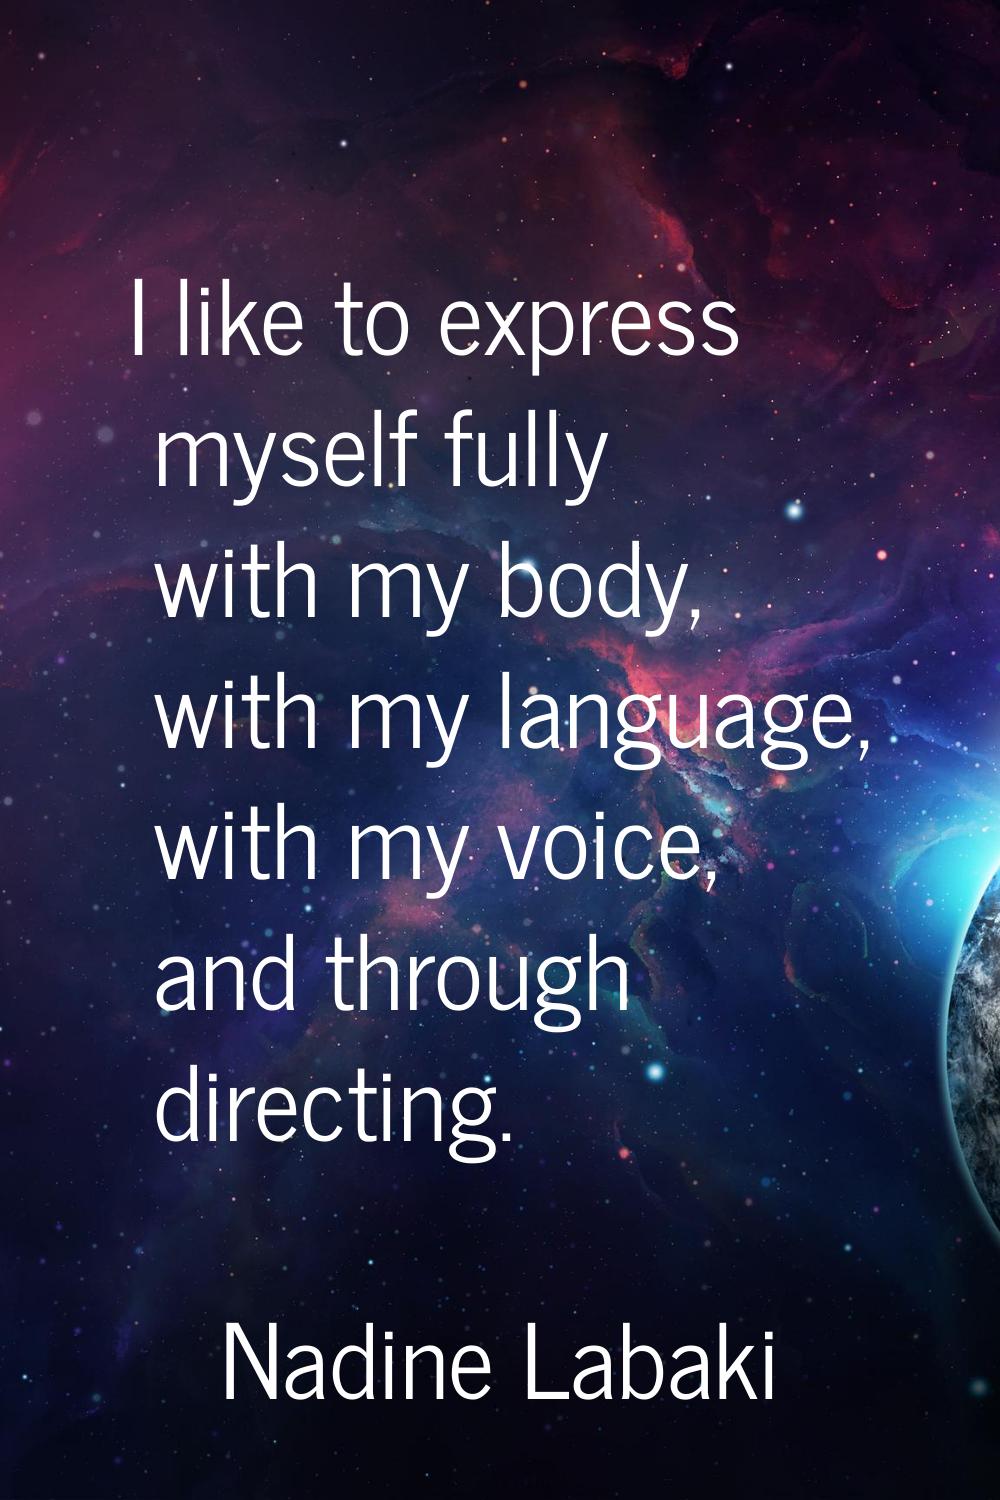 I like to express myself fully with my body, with my language, with my voice, and through directing